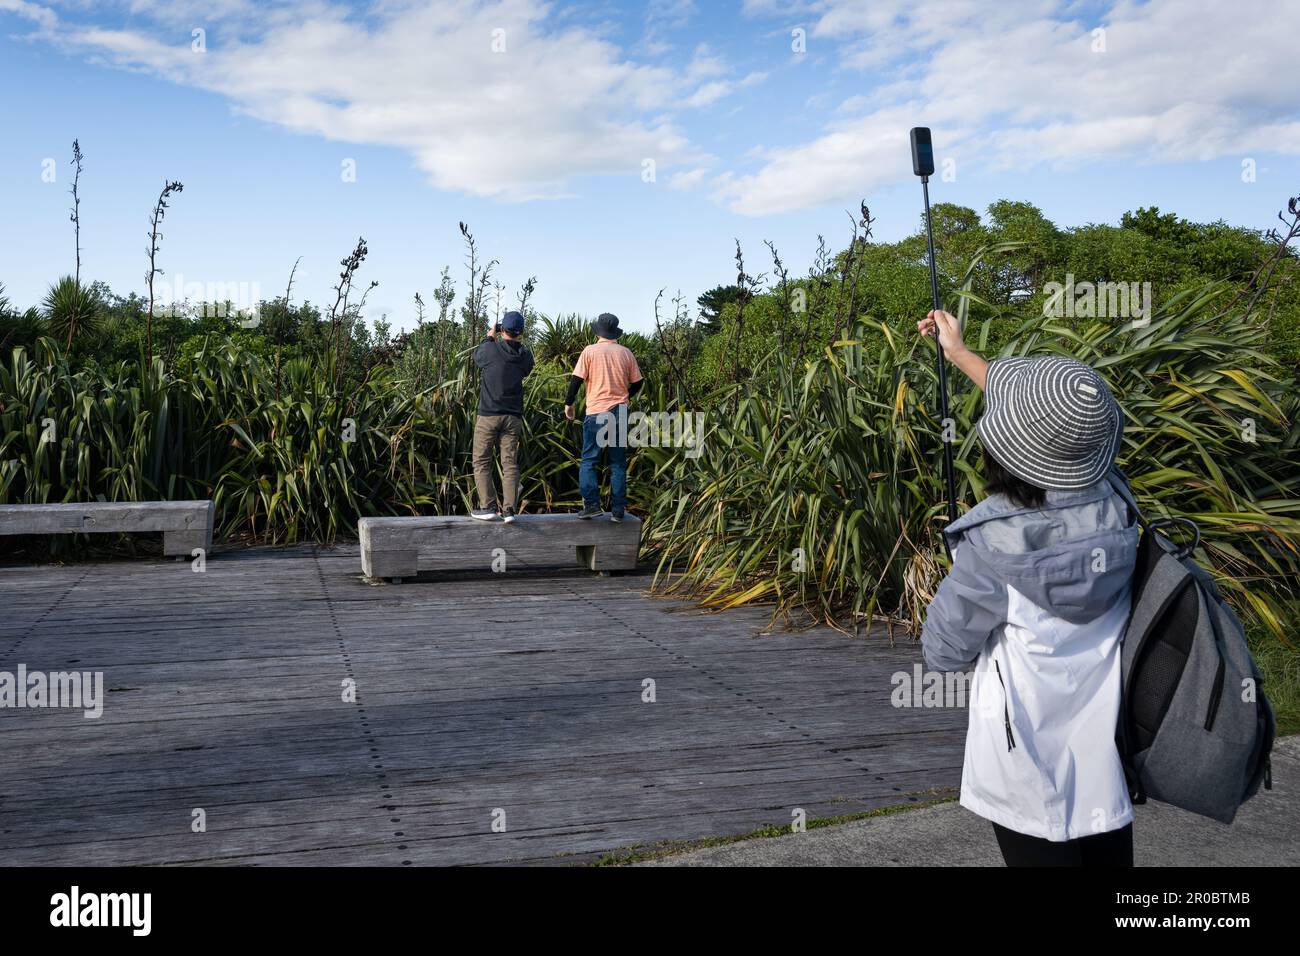 People looking over flax plants and taking photos at New Plymouth Coastal Walkway. Concept of something interesting over there. Stock Photo